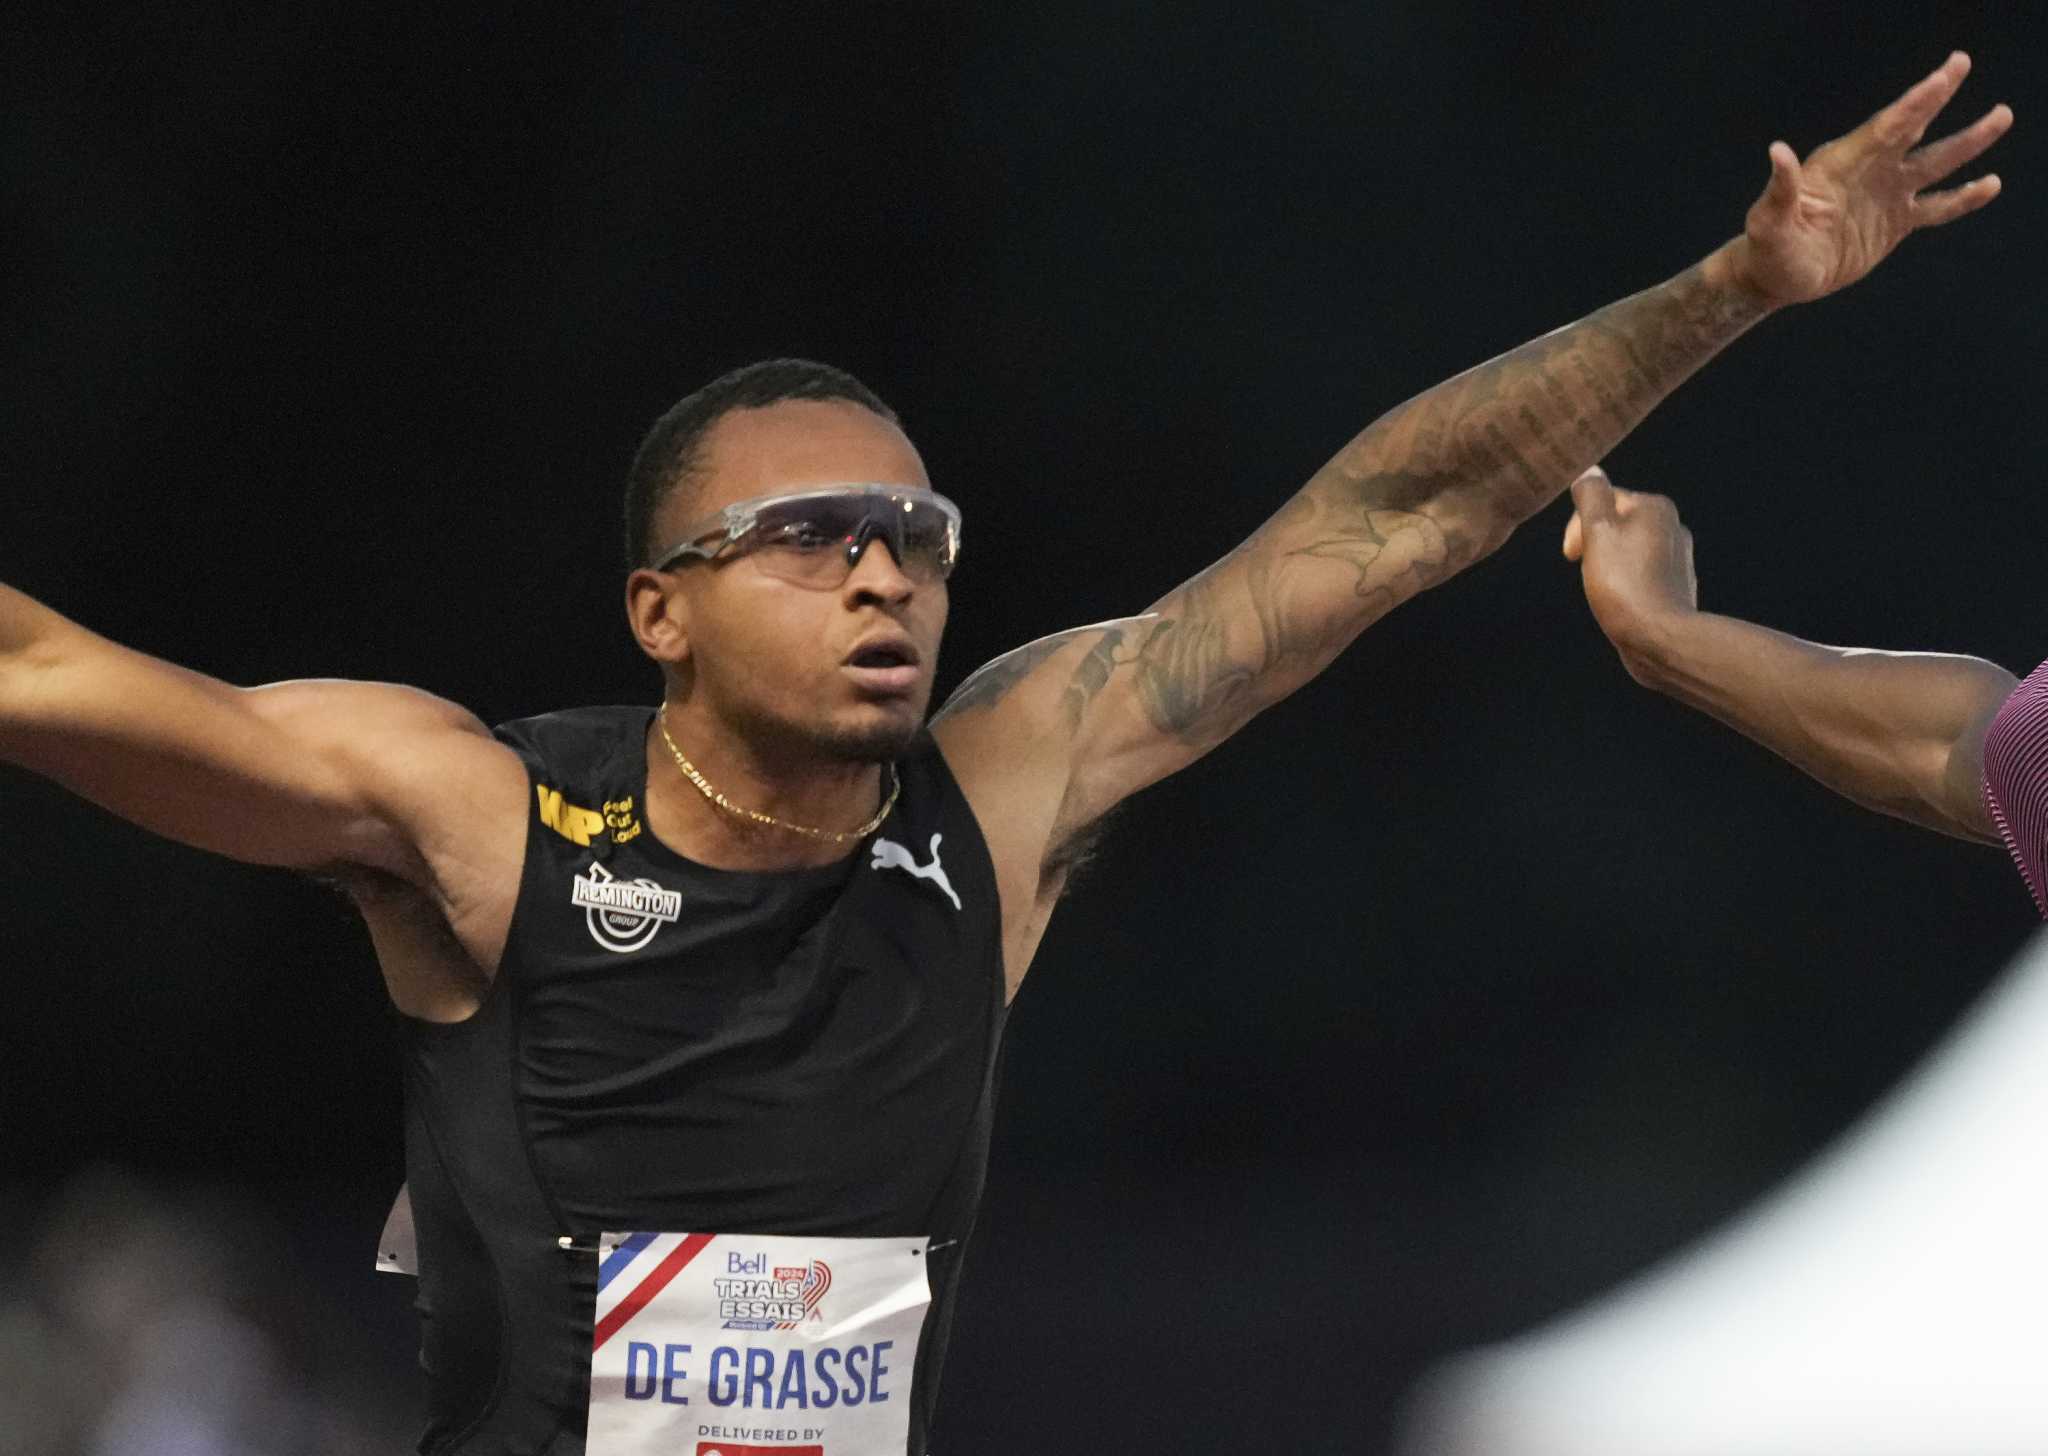 Andre De Grasse wins 100 meters in the Canadian Olympic track and field trials